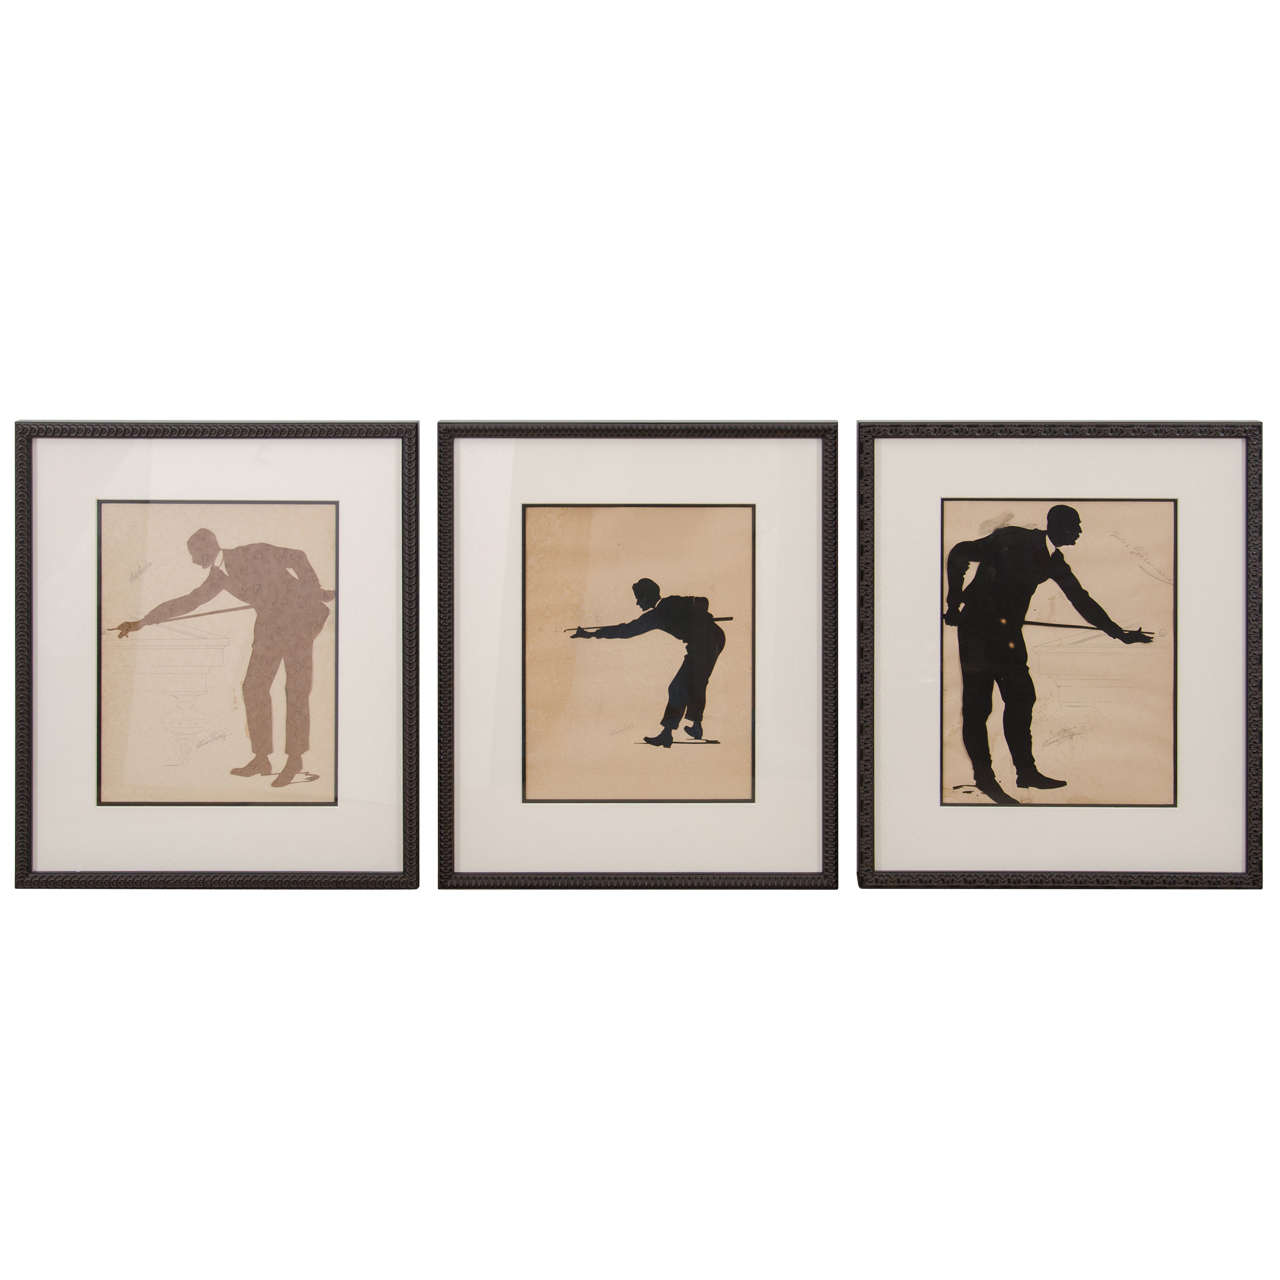 Set of Three Framed Silhouette Billiard Players, Belgian, "Jules, " circa 1900 For Sale